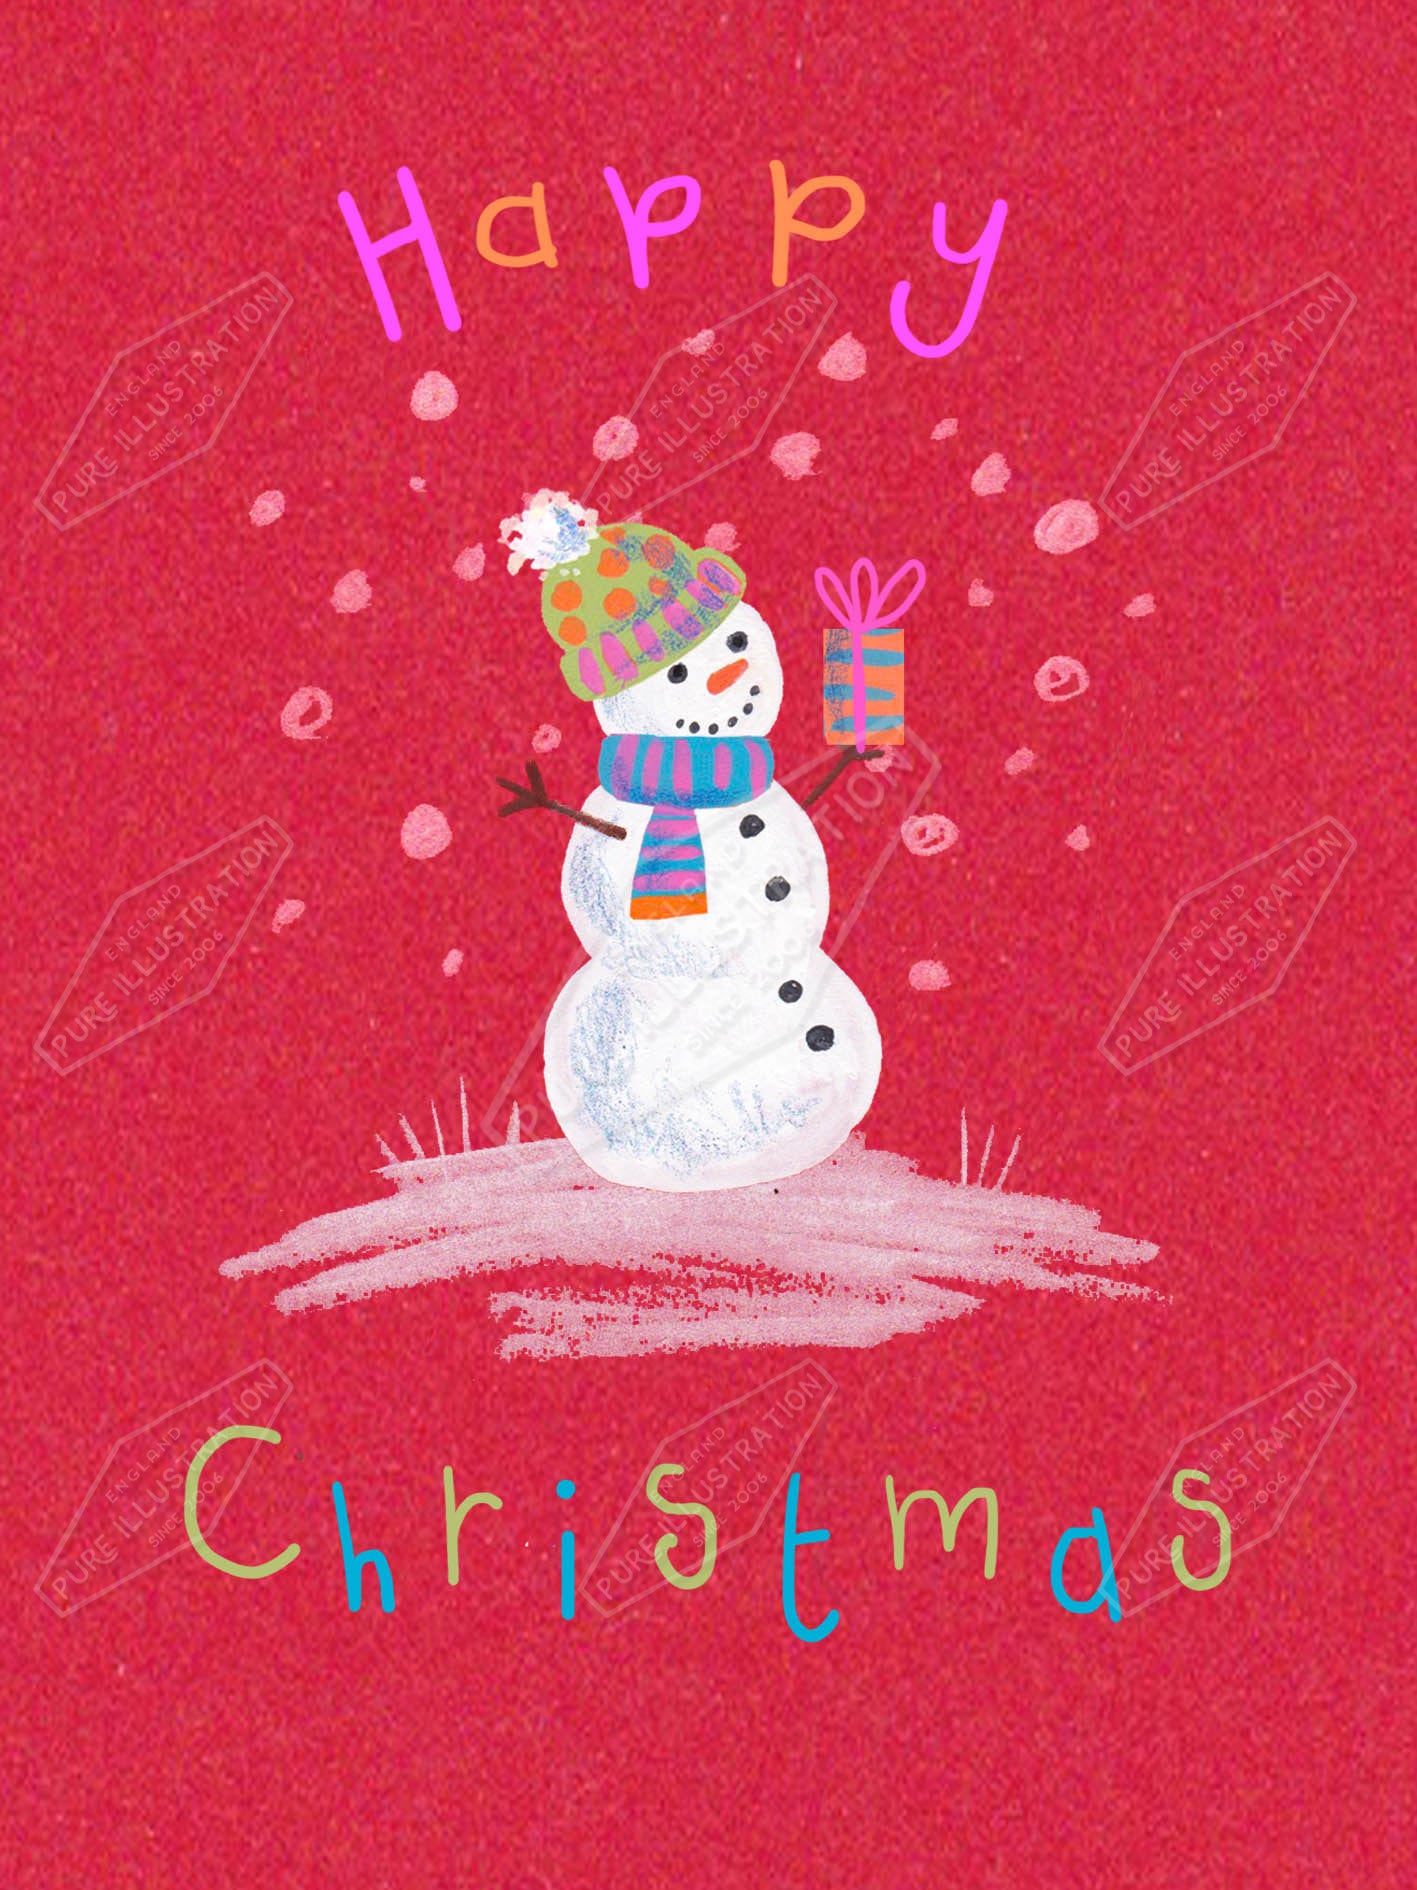 00035730AMA - Ally Marie is represented by Pure Art Licensing Agency - Christmas Greeting Card Design